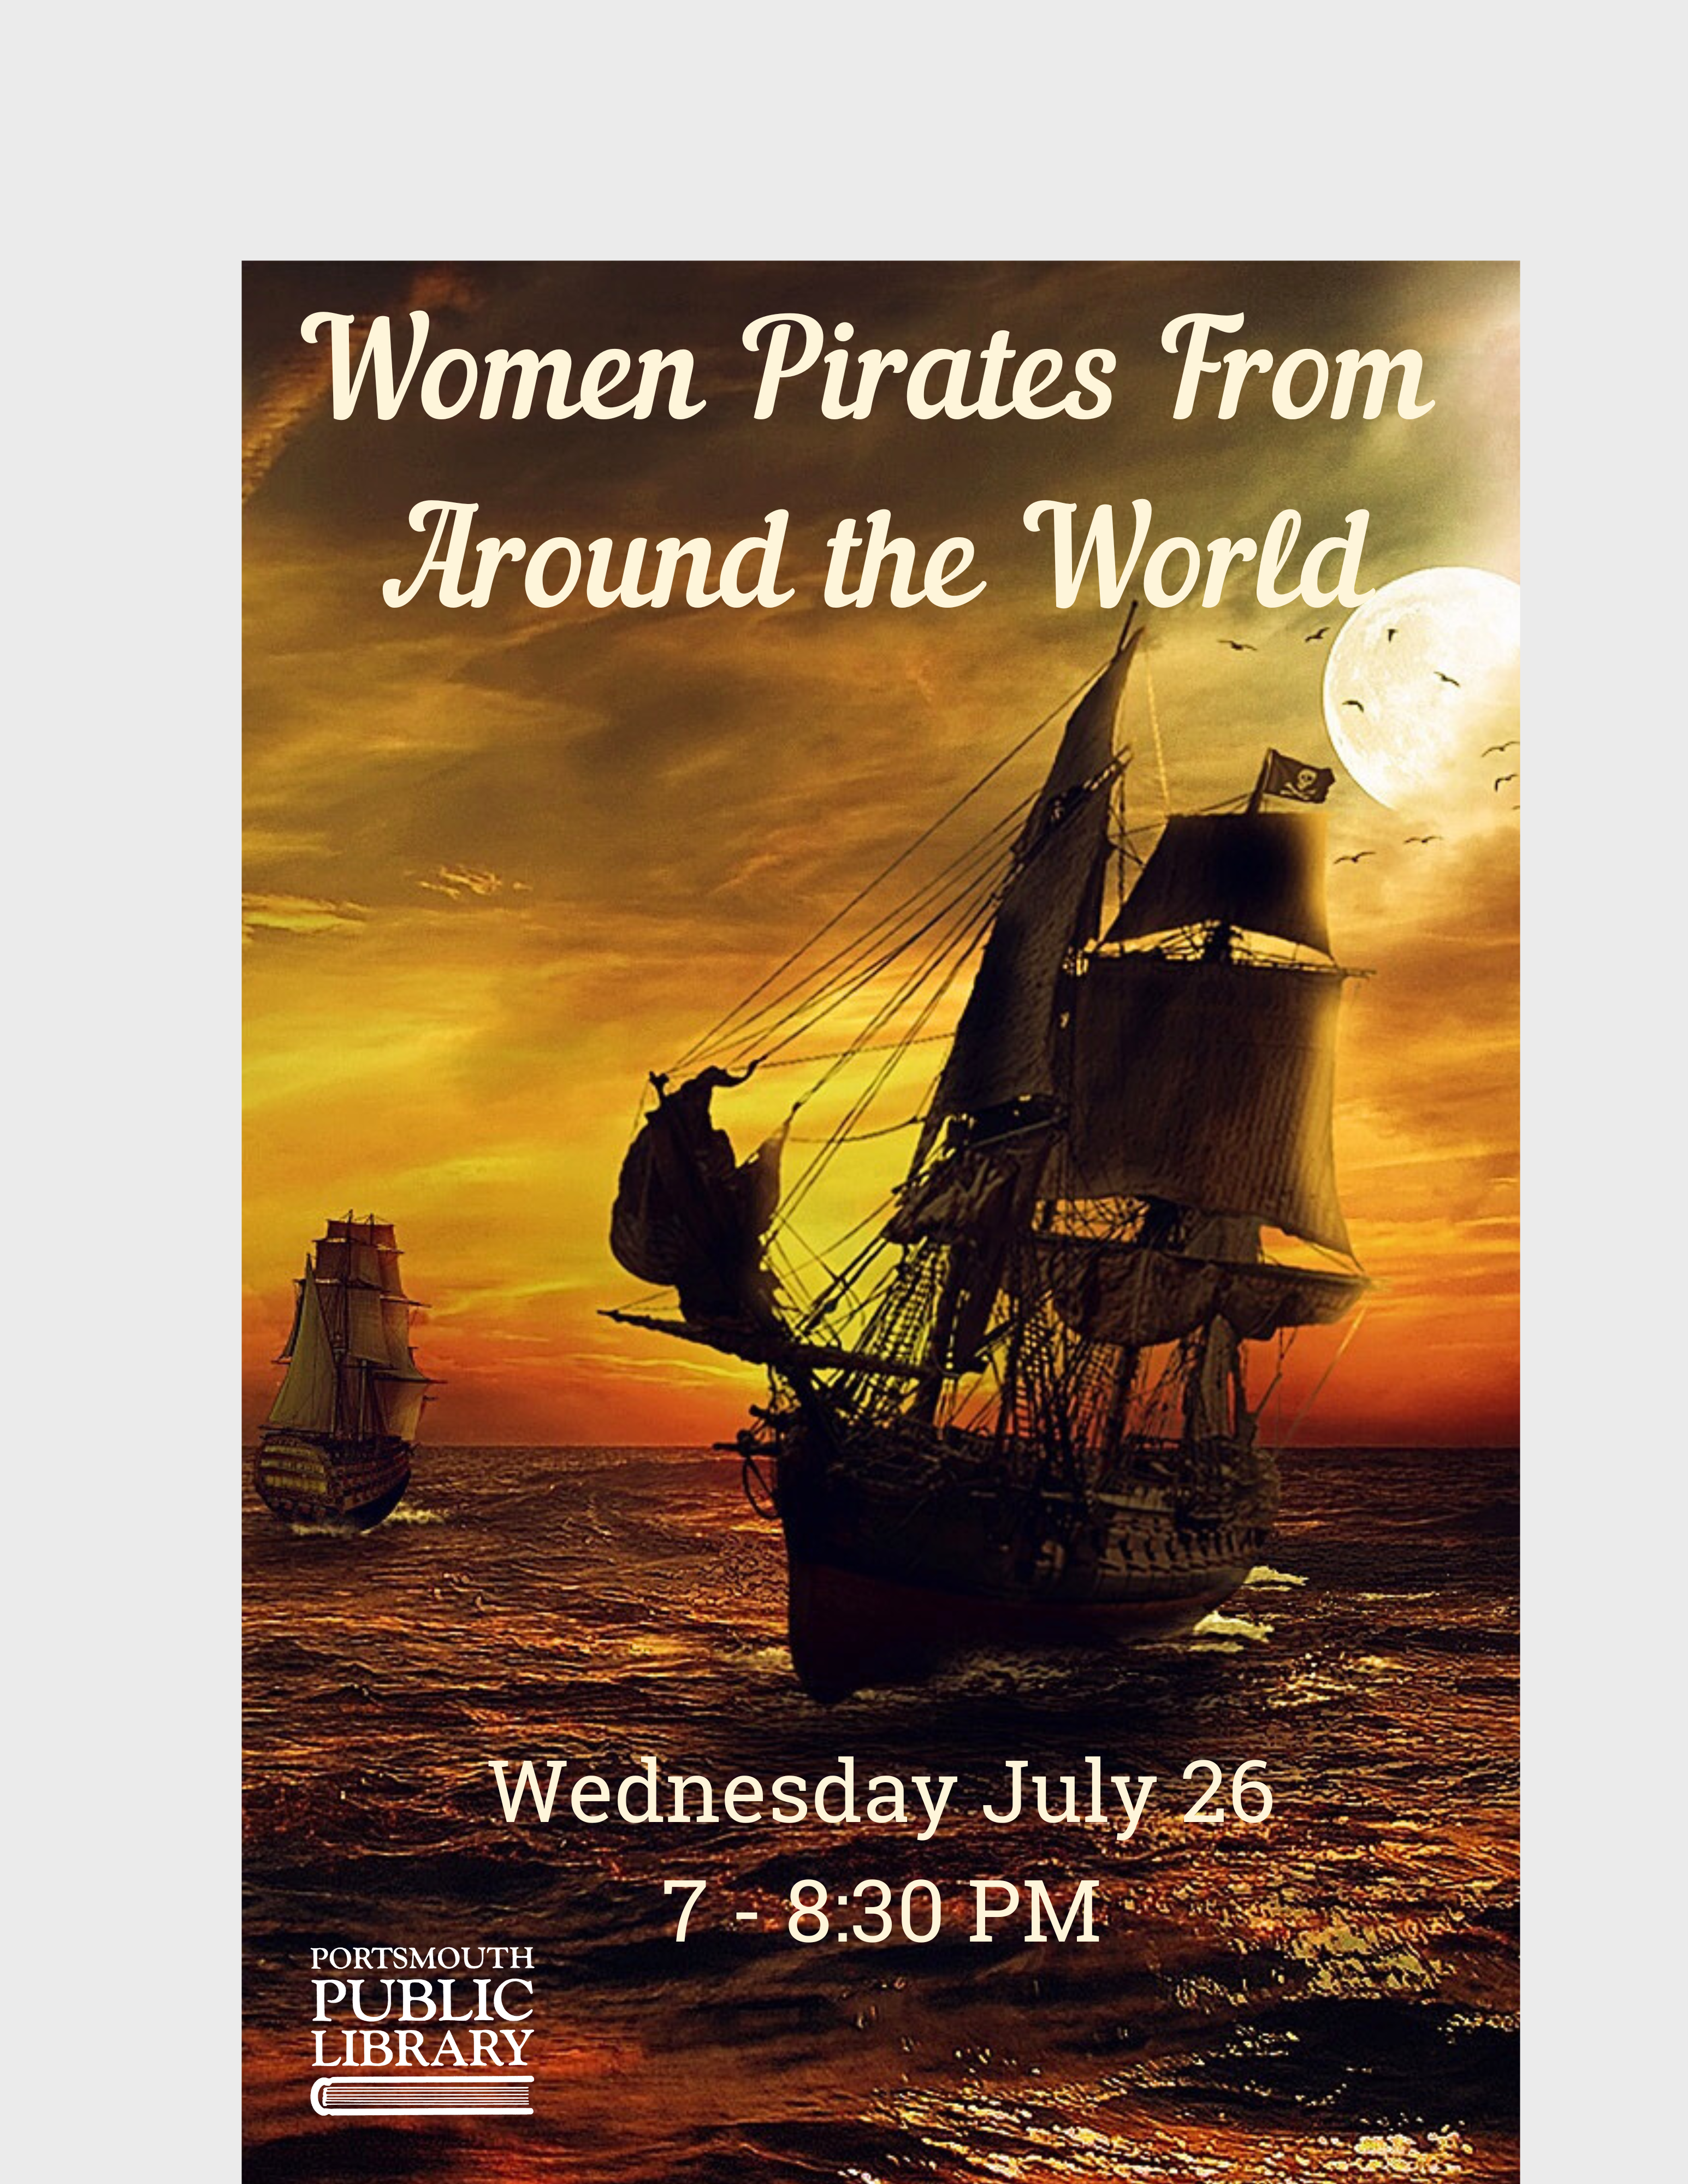 Women Pirates from Around the World Wednesday July 26 7-8:30 PM Ships on the ocean at sunset schooners